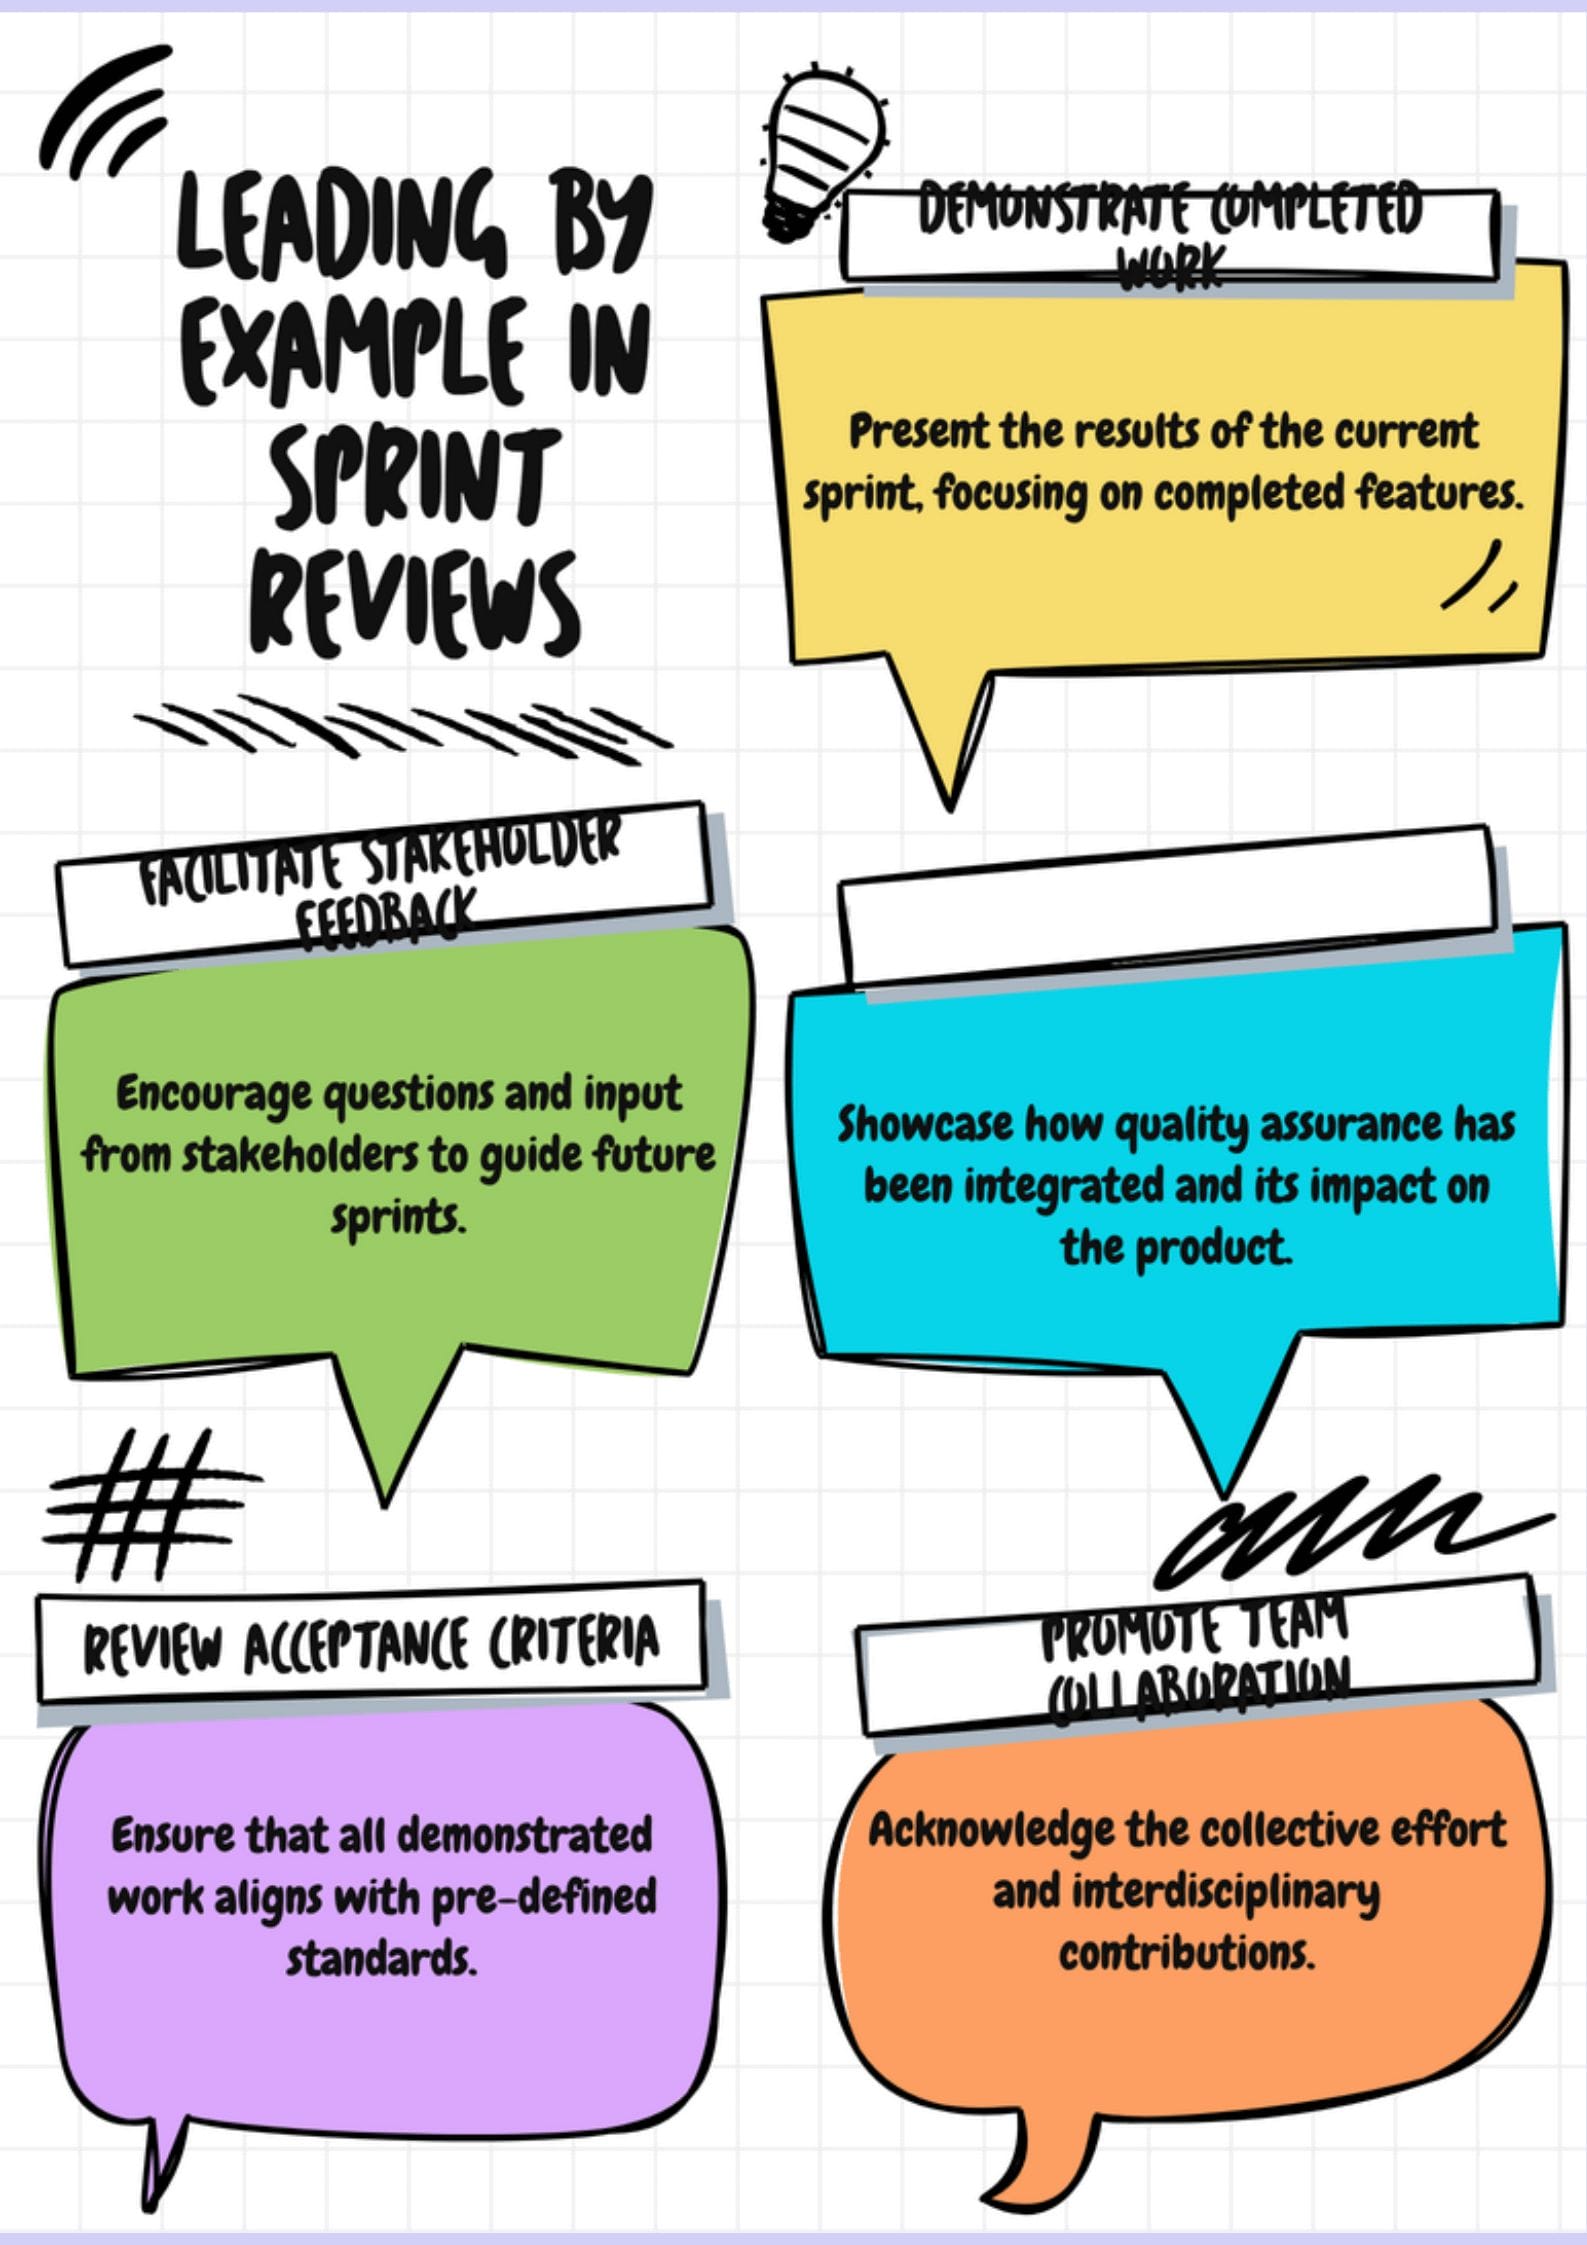 Leading by Example in Sprint Reviews